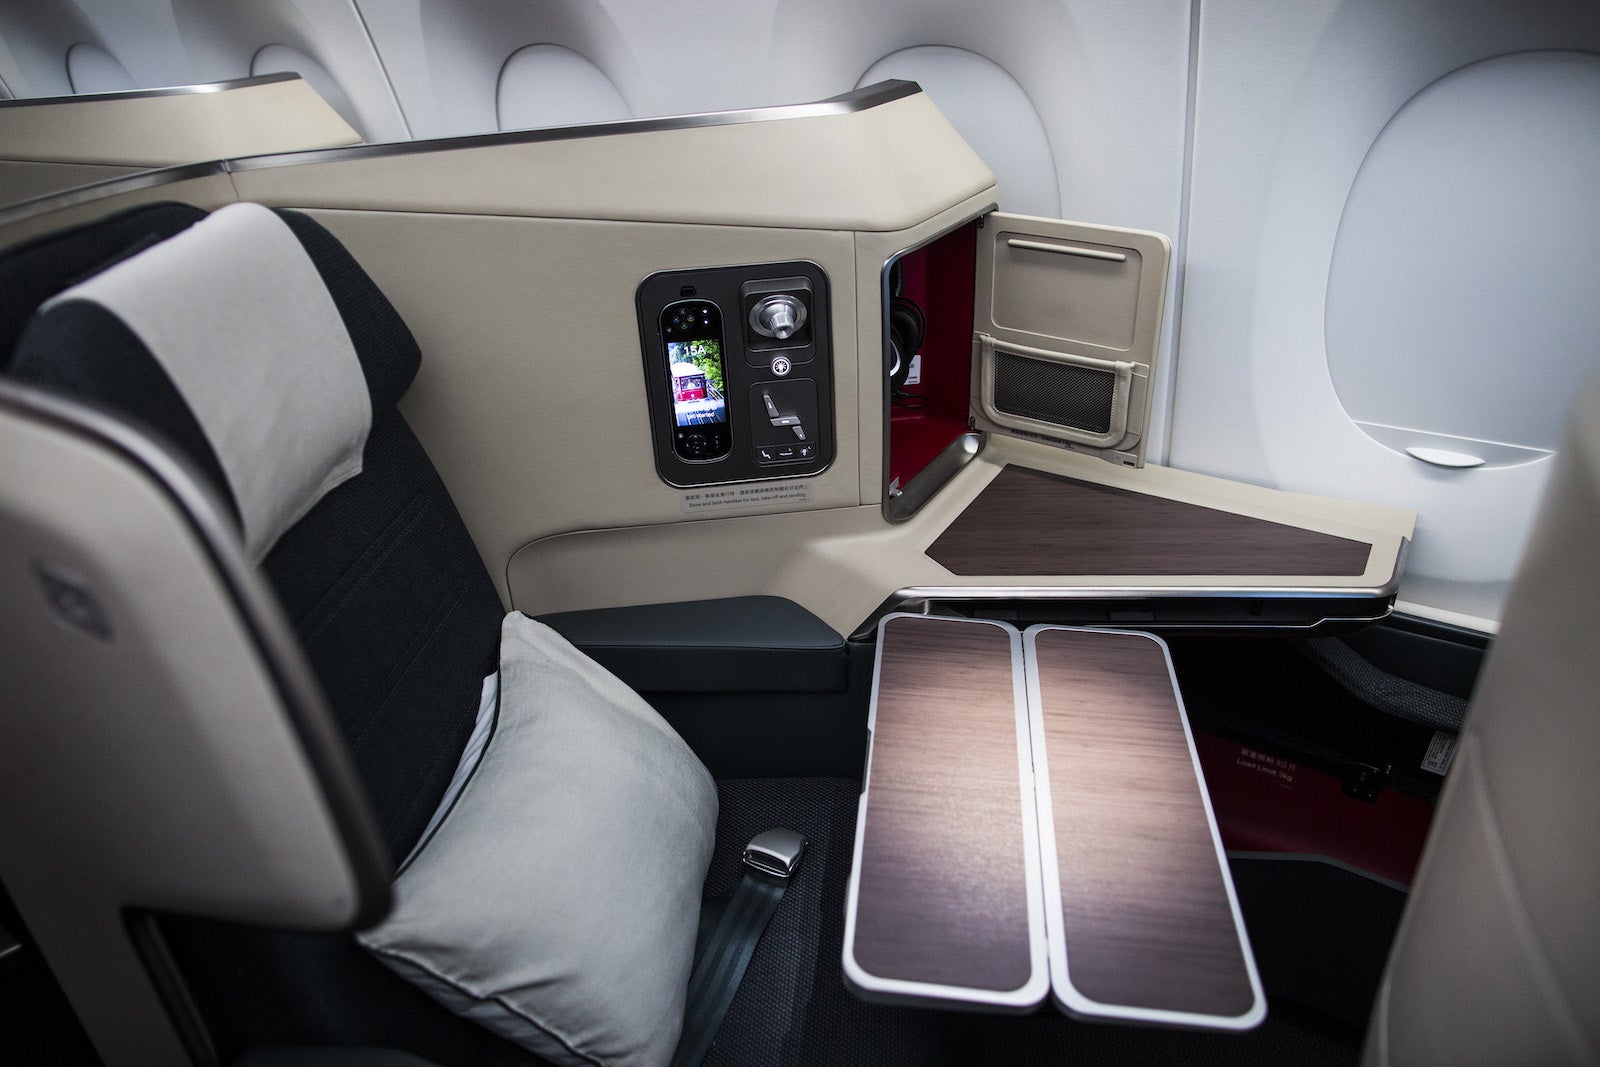 Cathay Pacific A350-900 business class